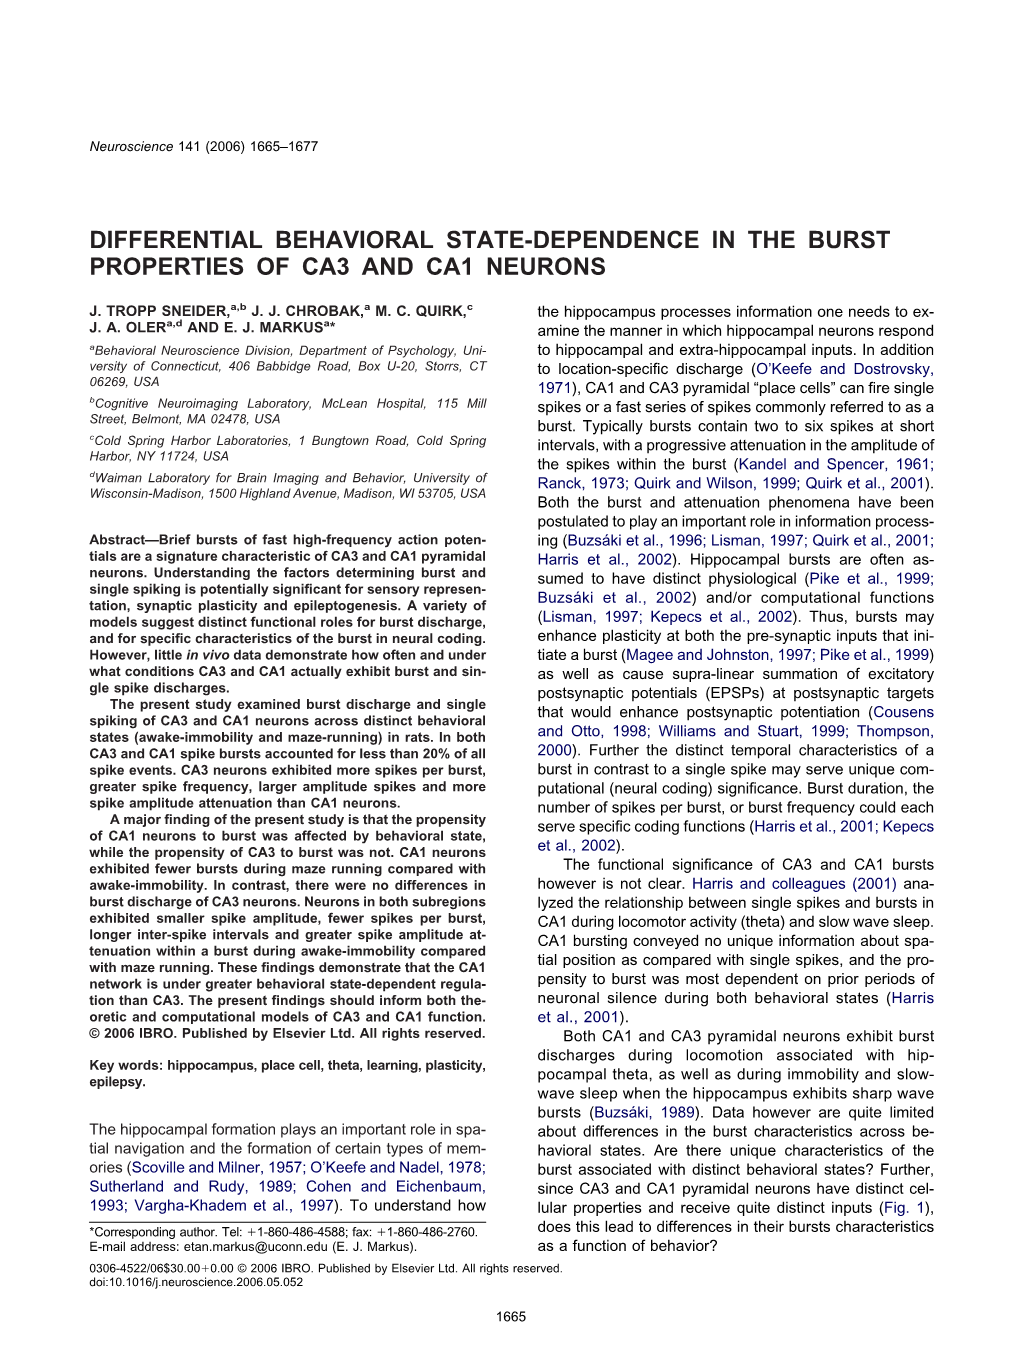 Differential Behavioral State-Dependence in the Burst Properties of Ca3 and Ca1 Neurons